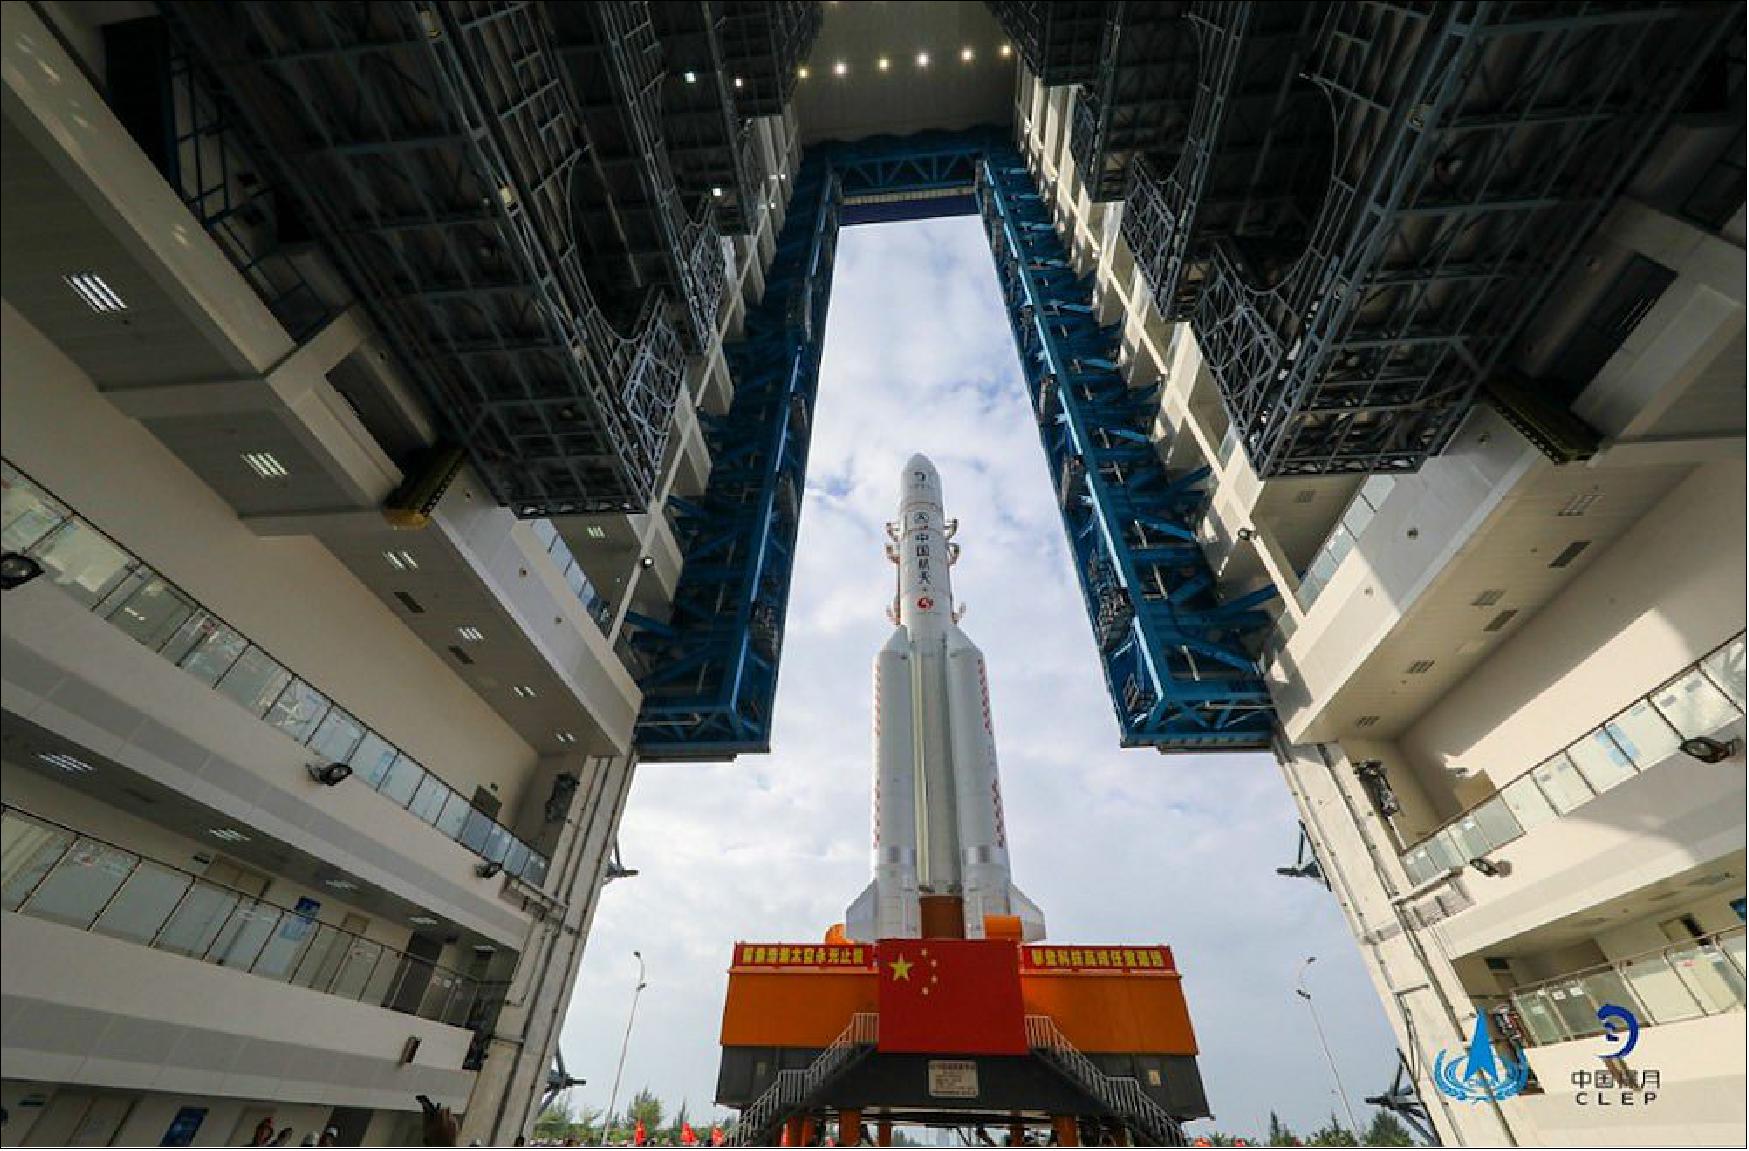 Figure 9: A Chinese Long March 5 rocket rolls out of its assembly building at the Wenchang launch base Nov. 17 with the Chang’e-5 spacecraft (image credit: CASC/CLEP) 8)